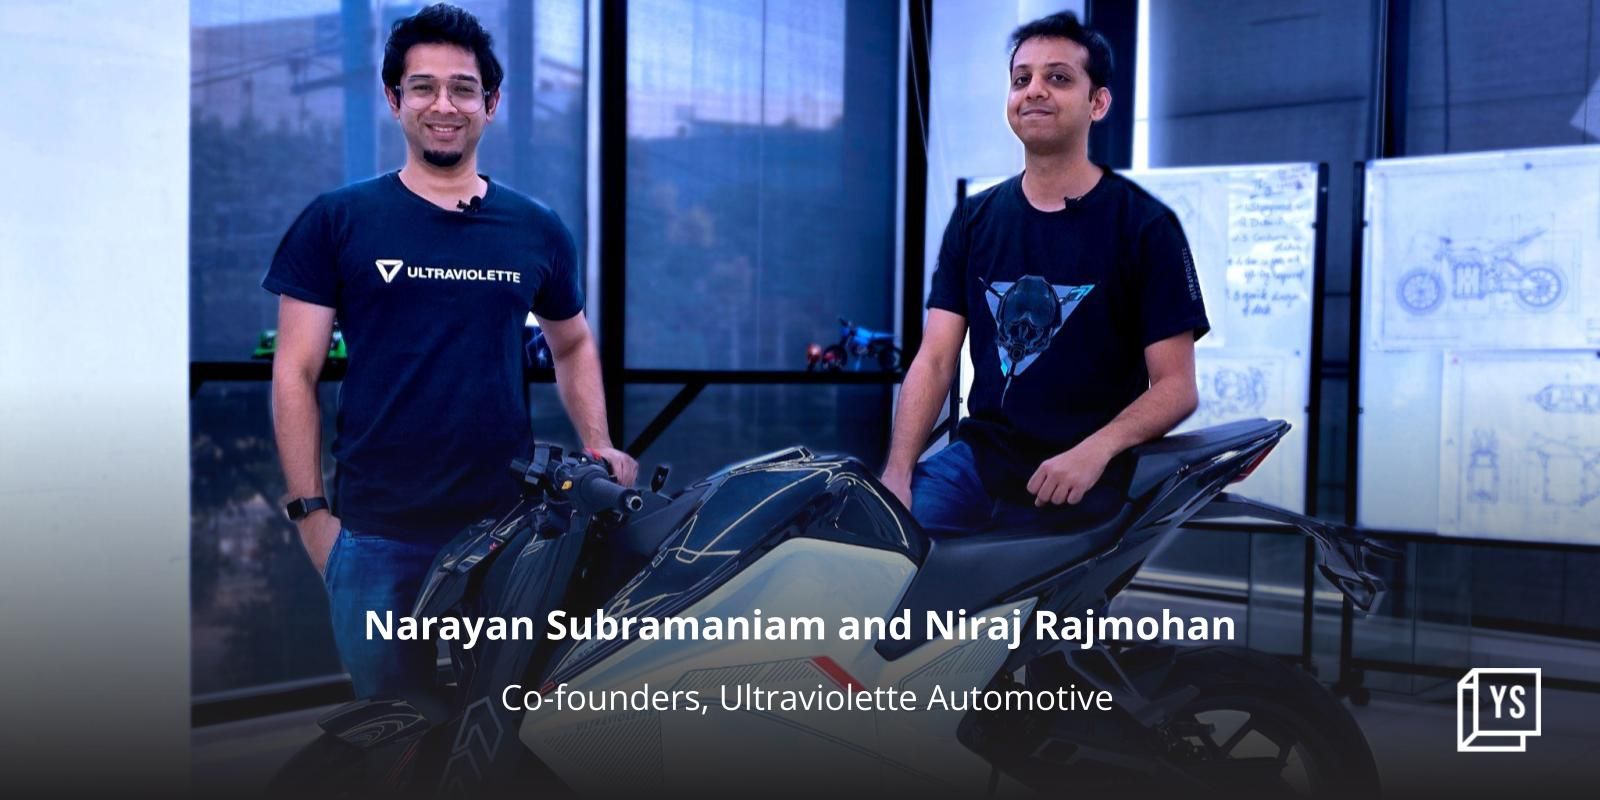 EV startup Ultraviolette's FY22 loss widens to Rs 1.81 Cr as expenses rise